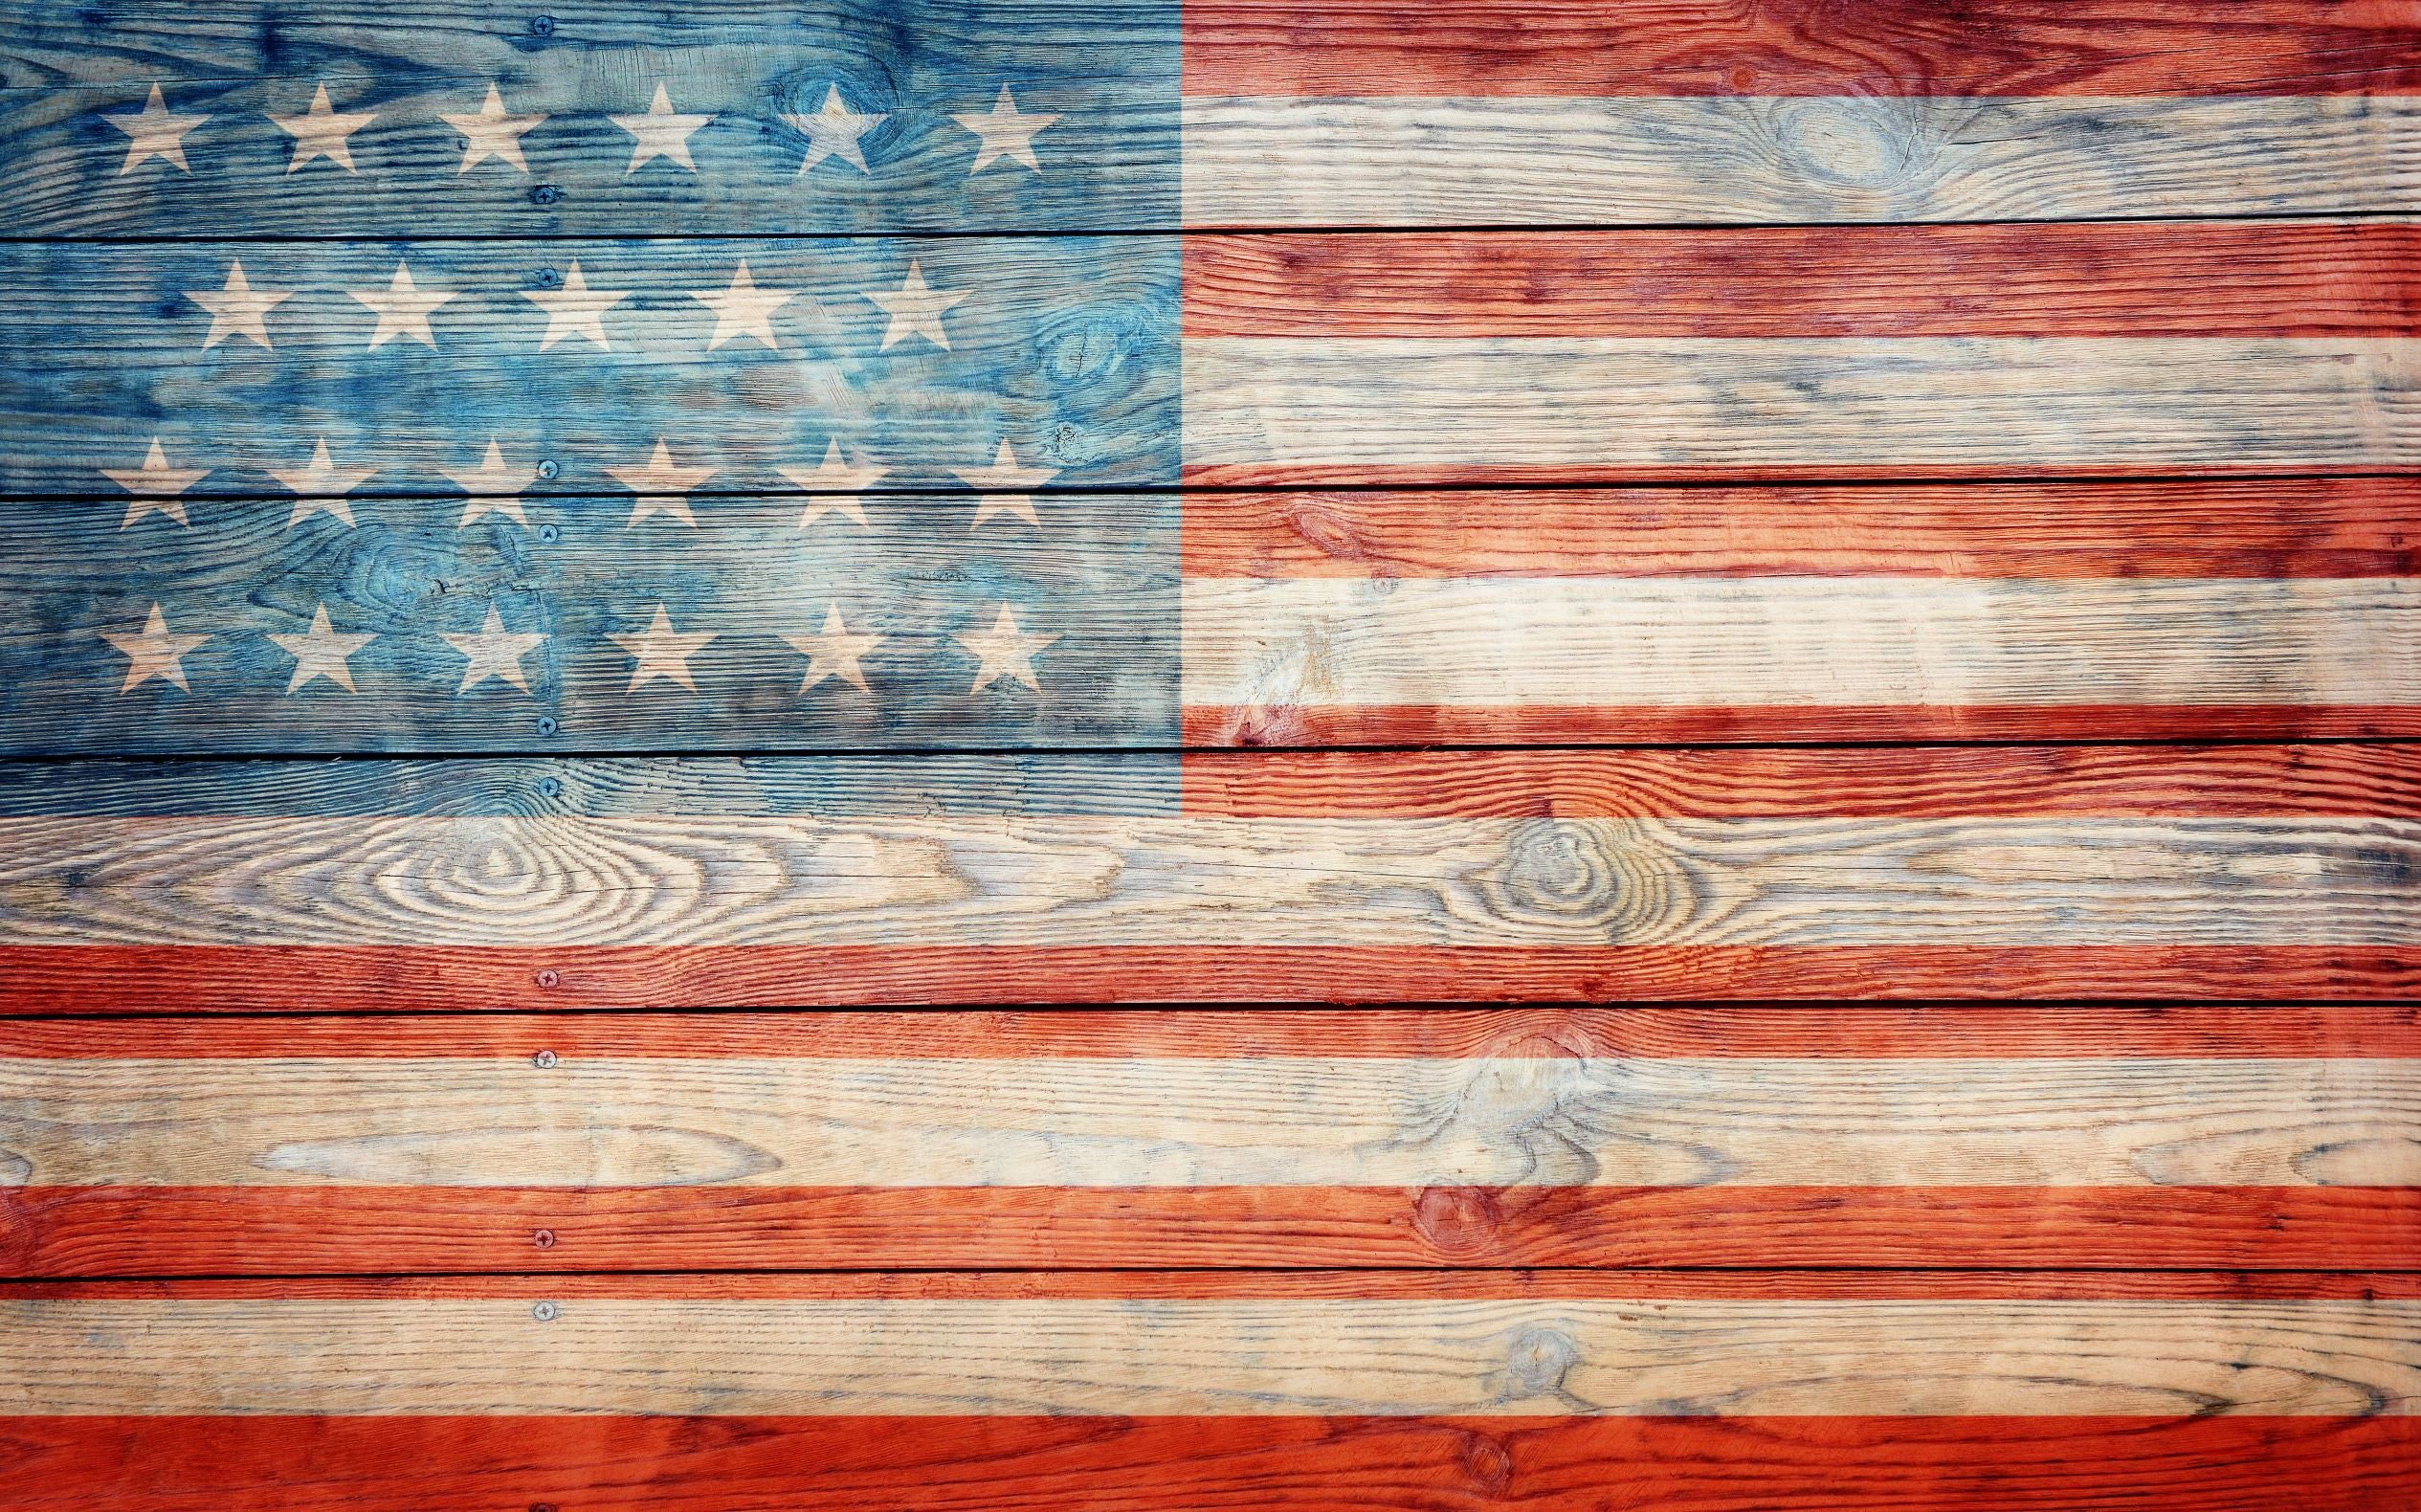 Distressed Wooden DIY American Flag project.